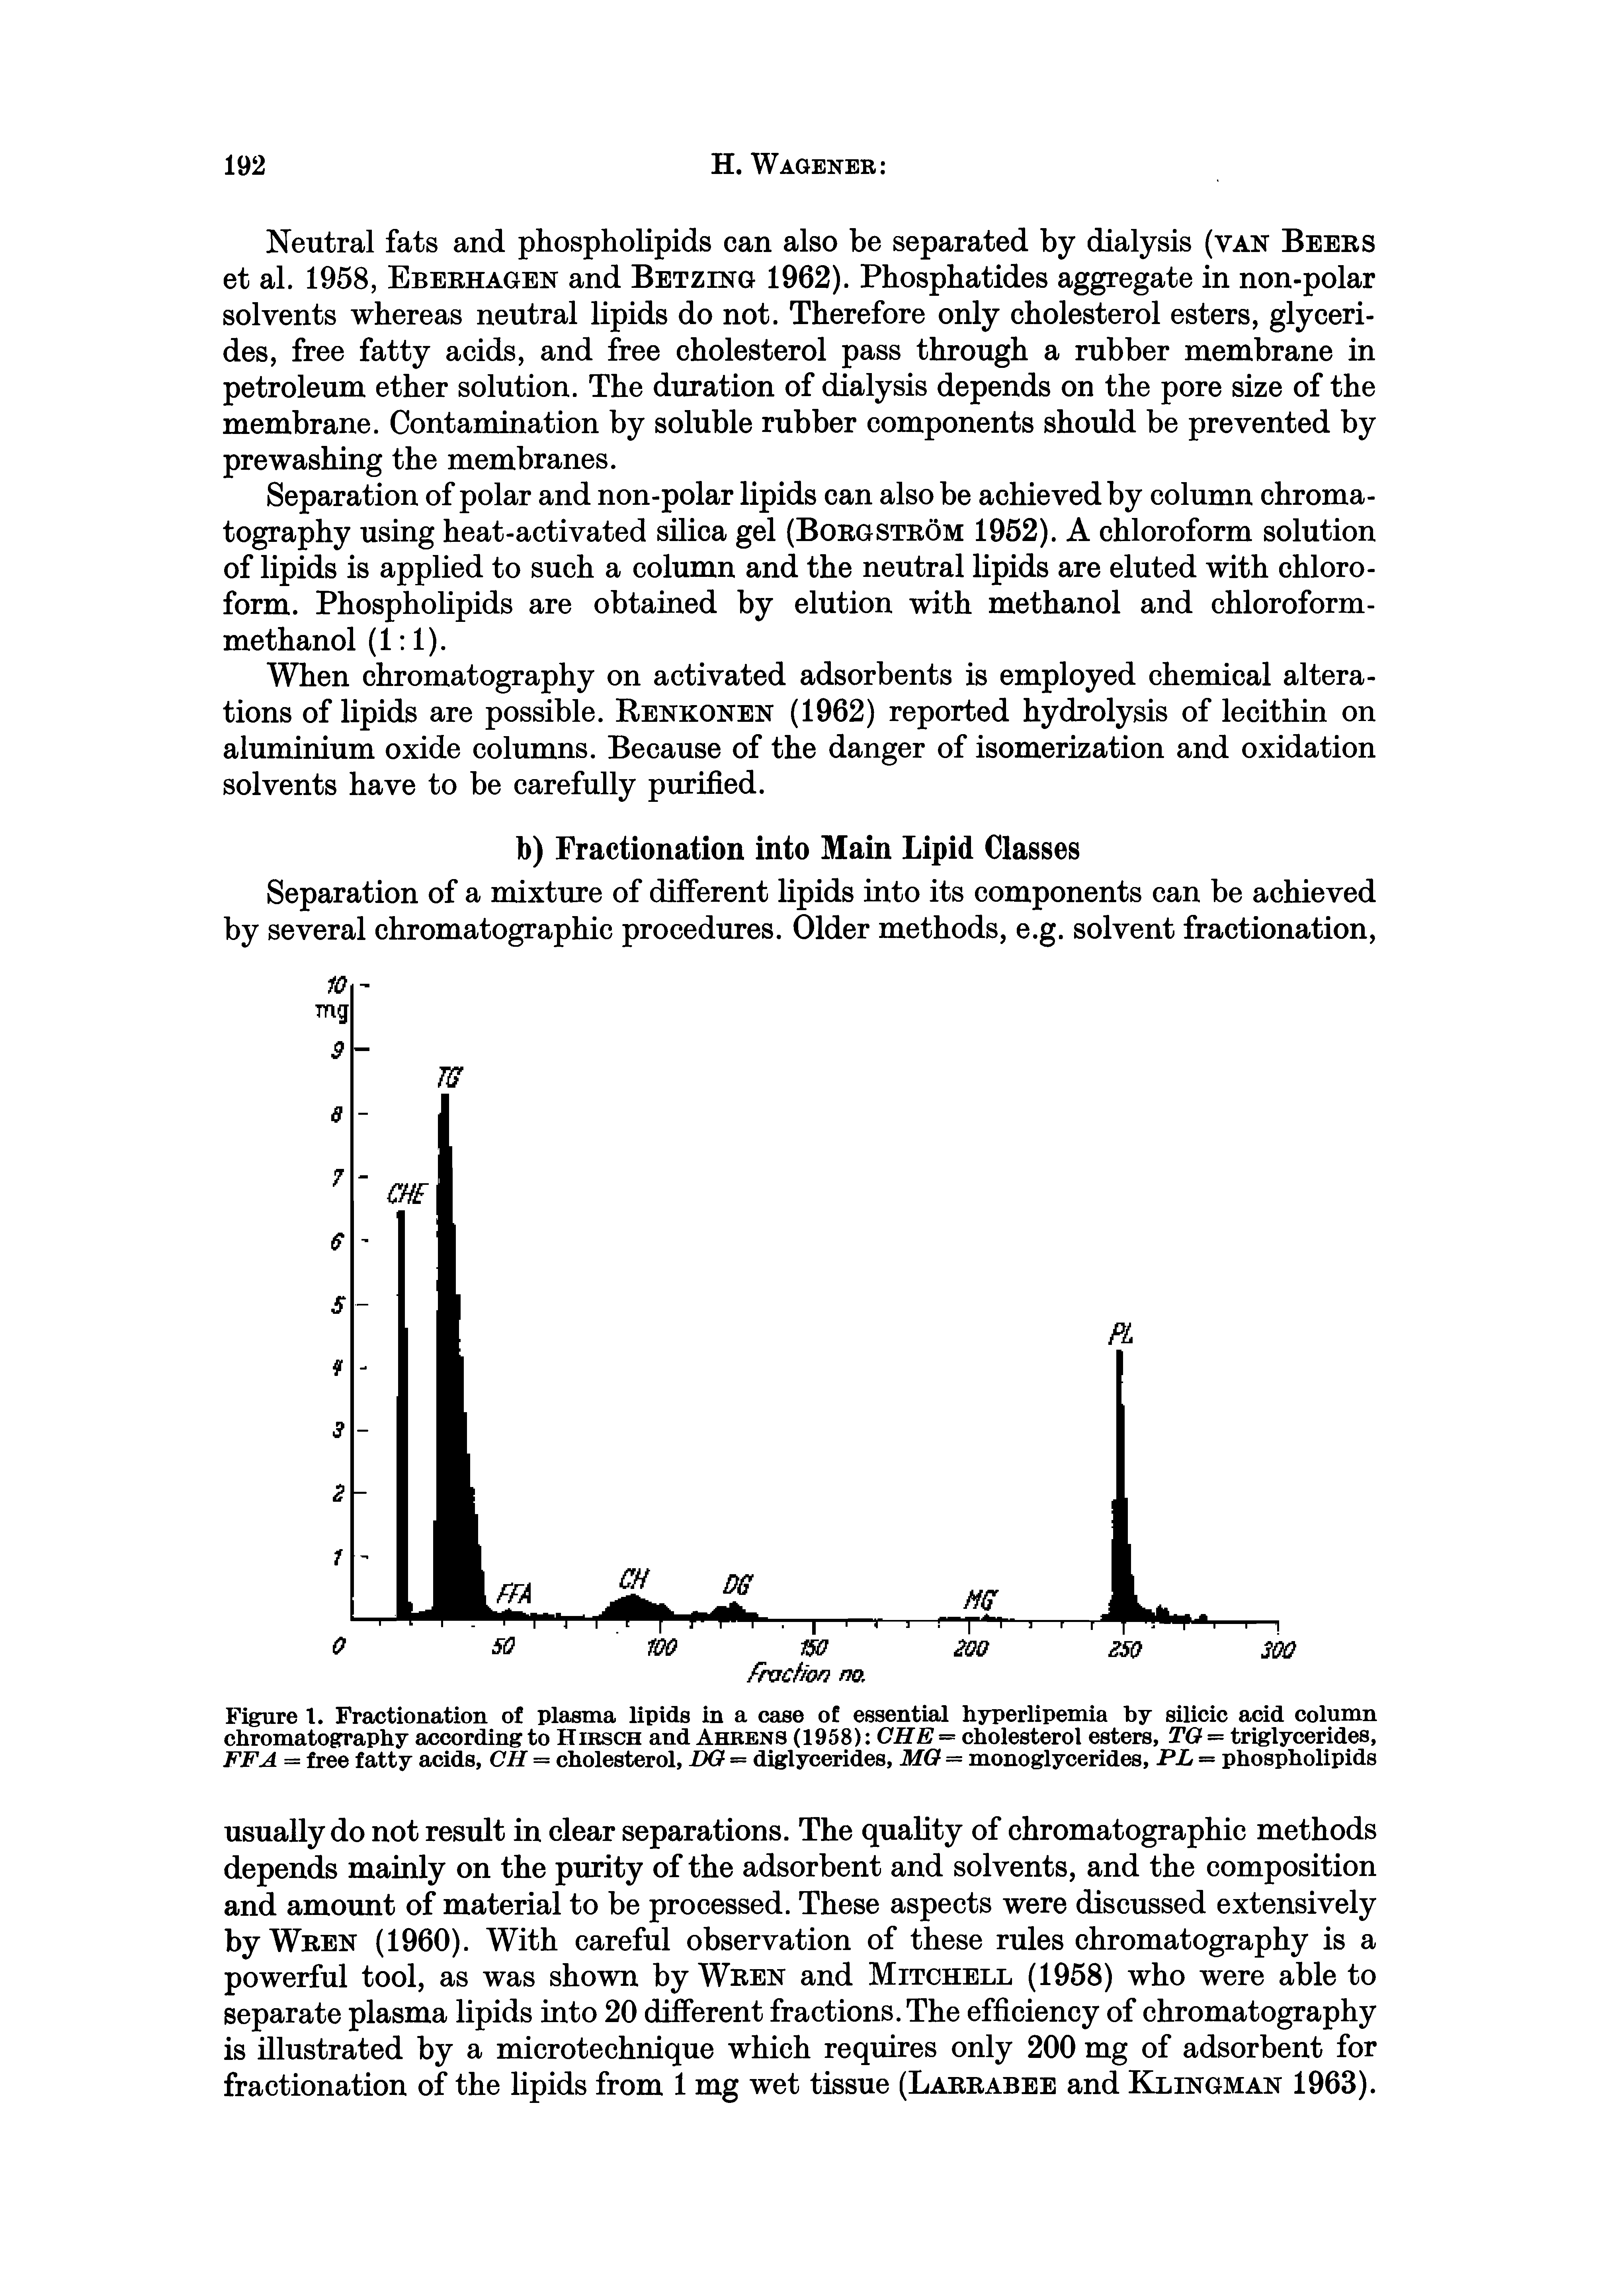 Figure 1. Fractionation of plasma lipids in a case of essential hyperlipemia by silicic acid column chromatography according to Hirsch and Ahrens (1958) — cholesterol esters, TG = triglycerides,...